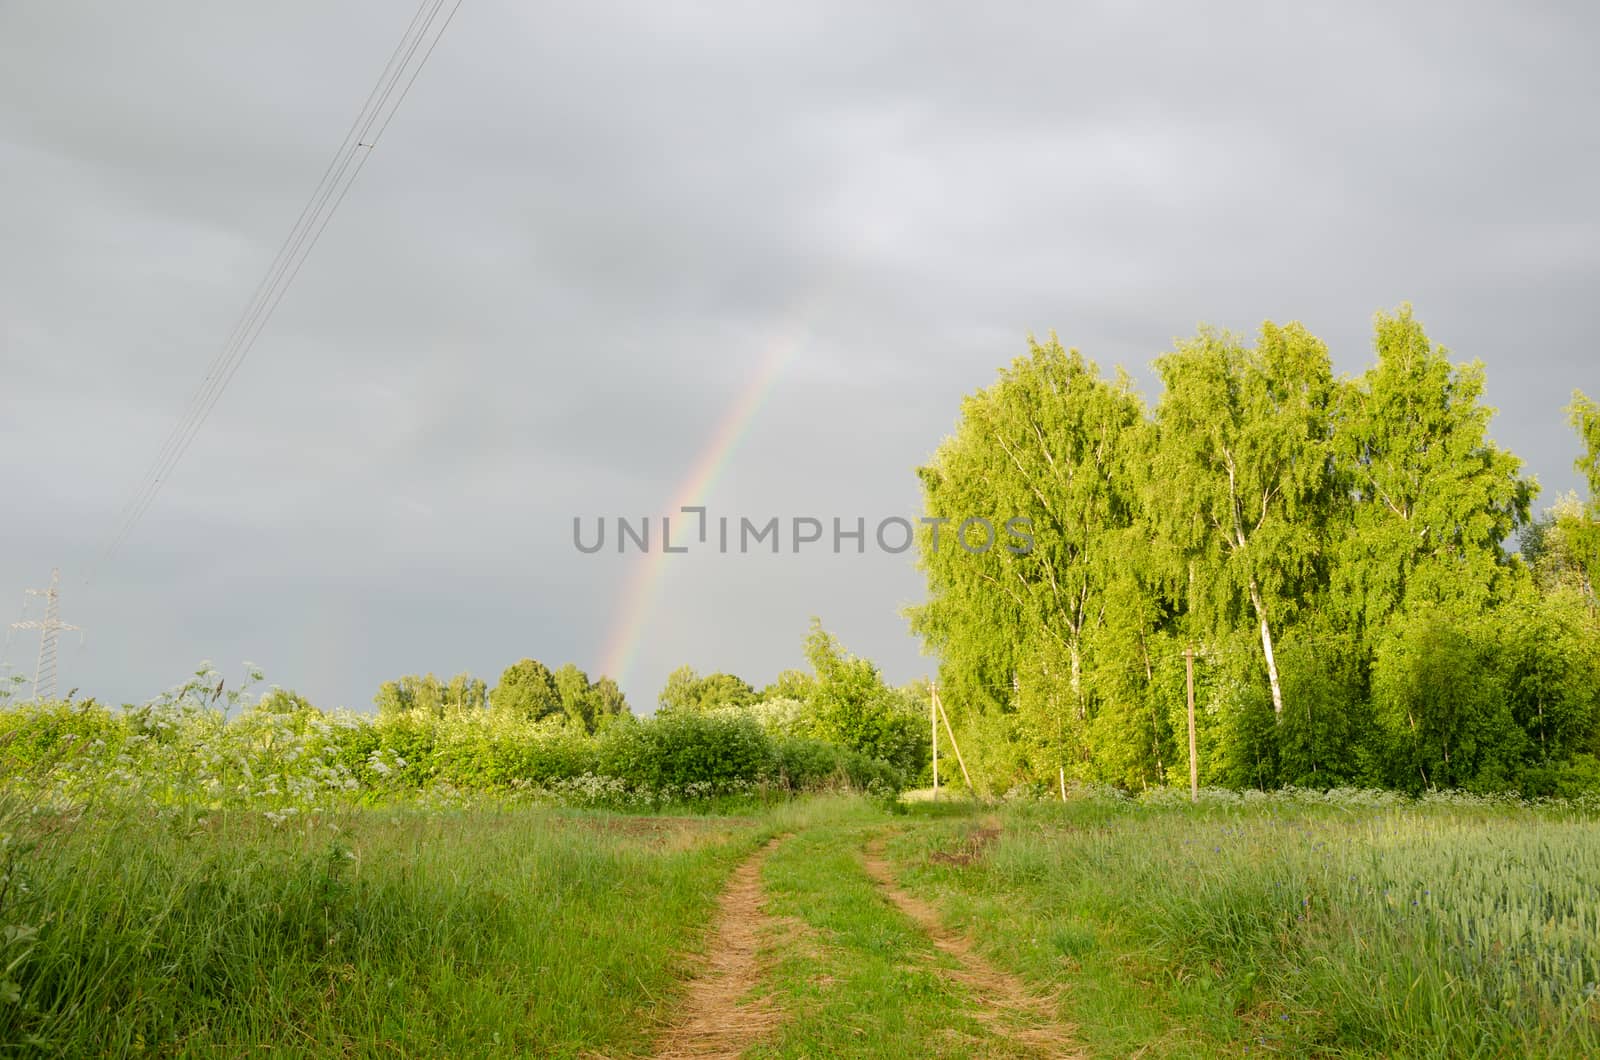 natural rainbow after the rain over green tree and rural path summer time